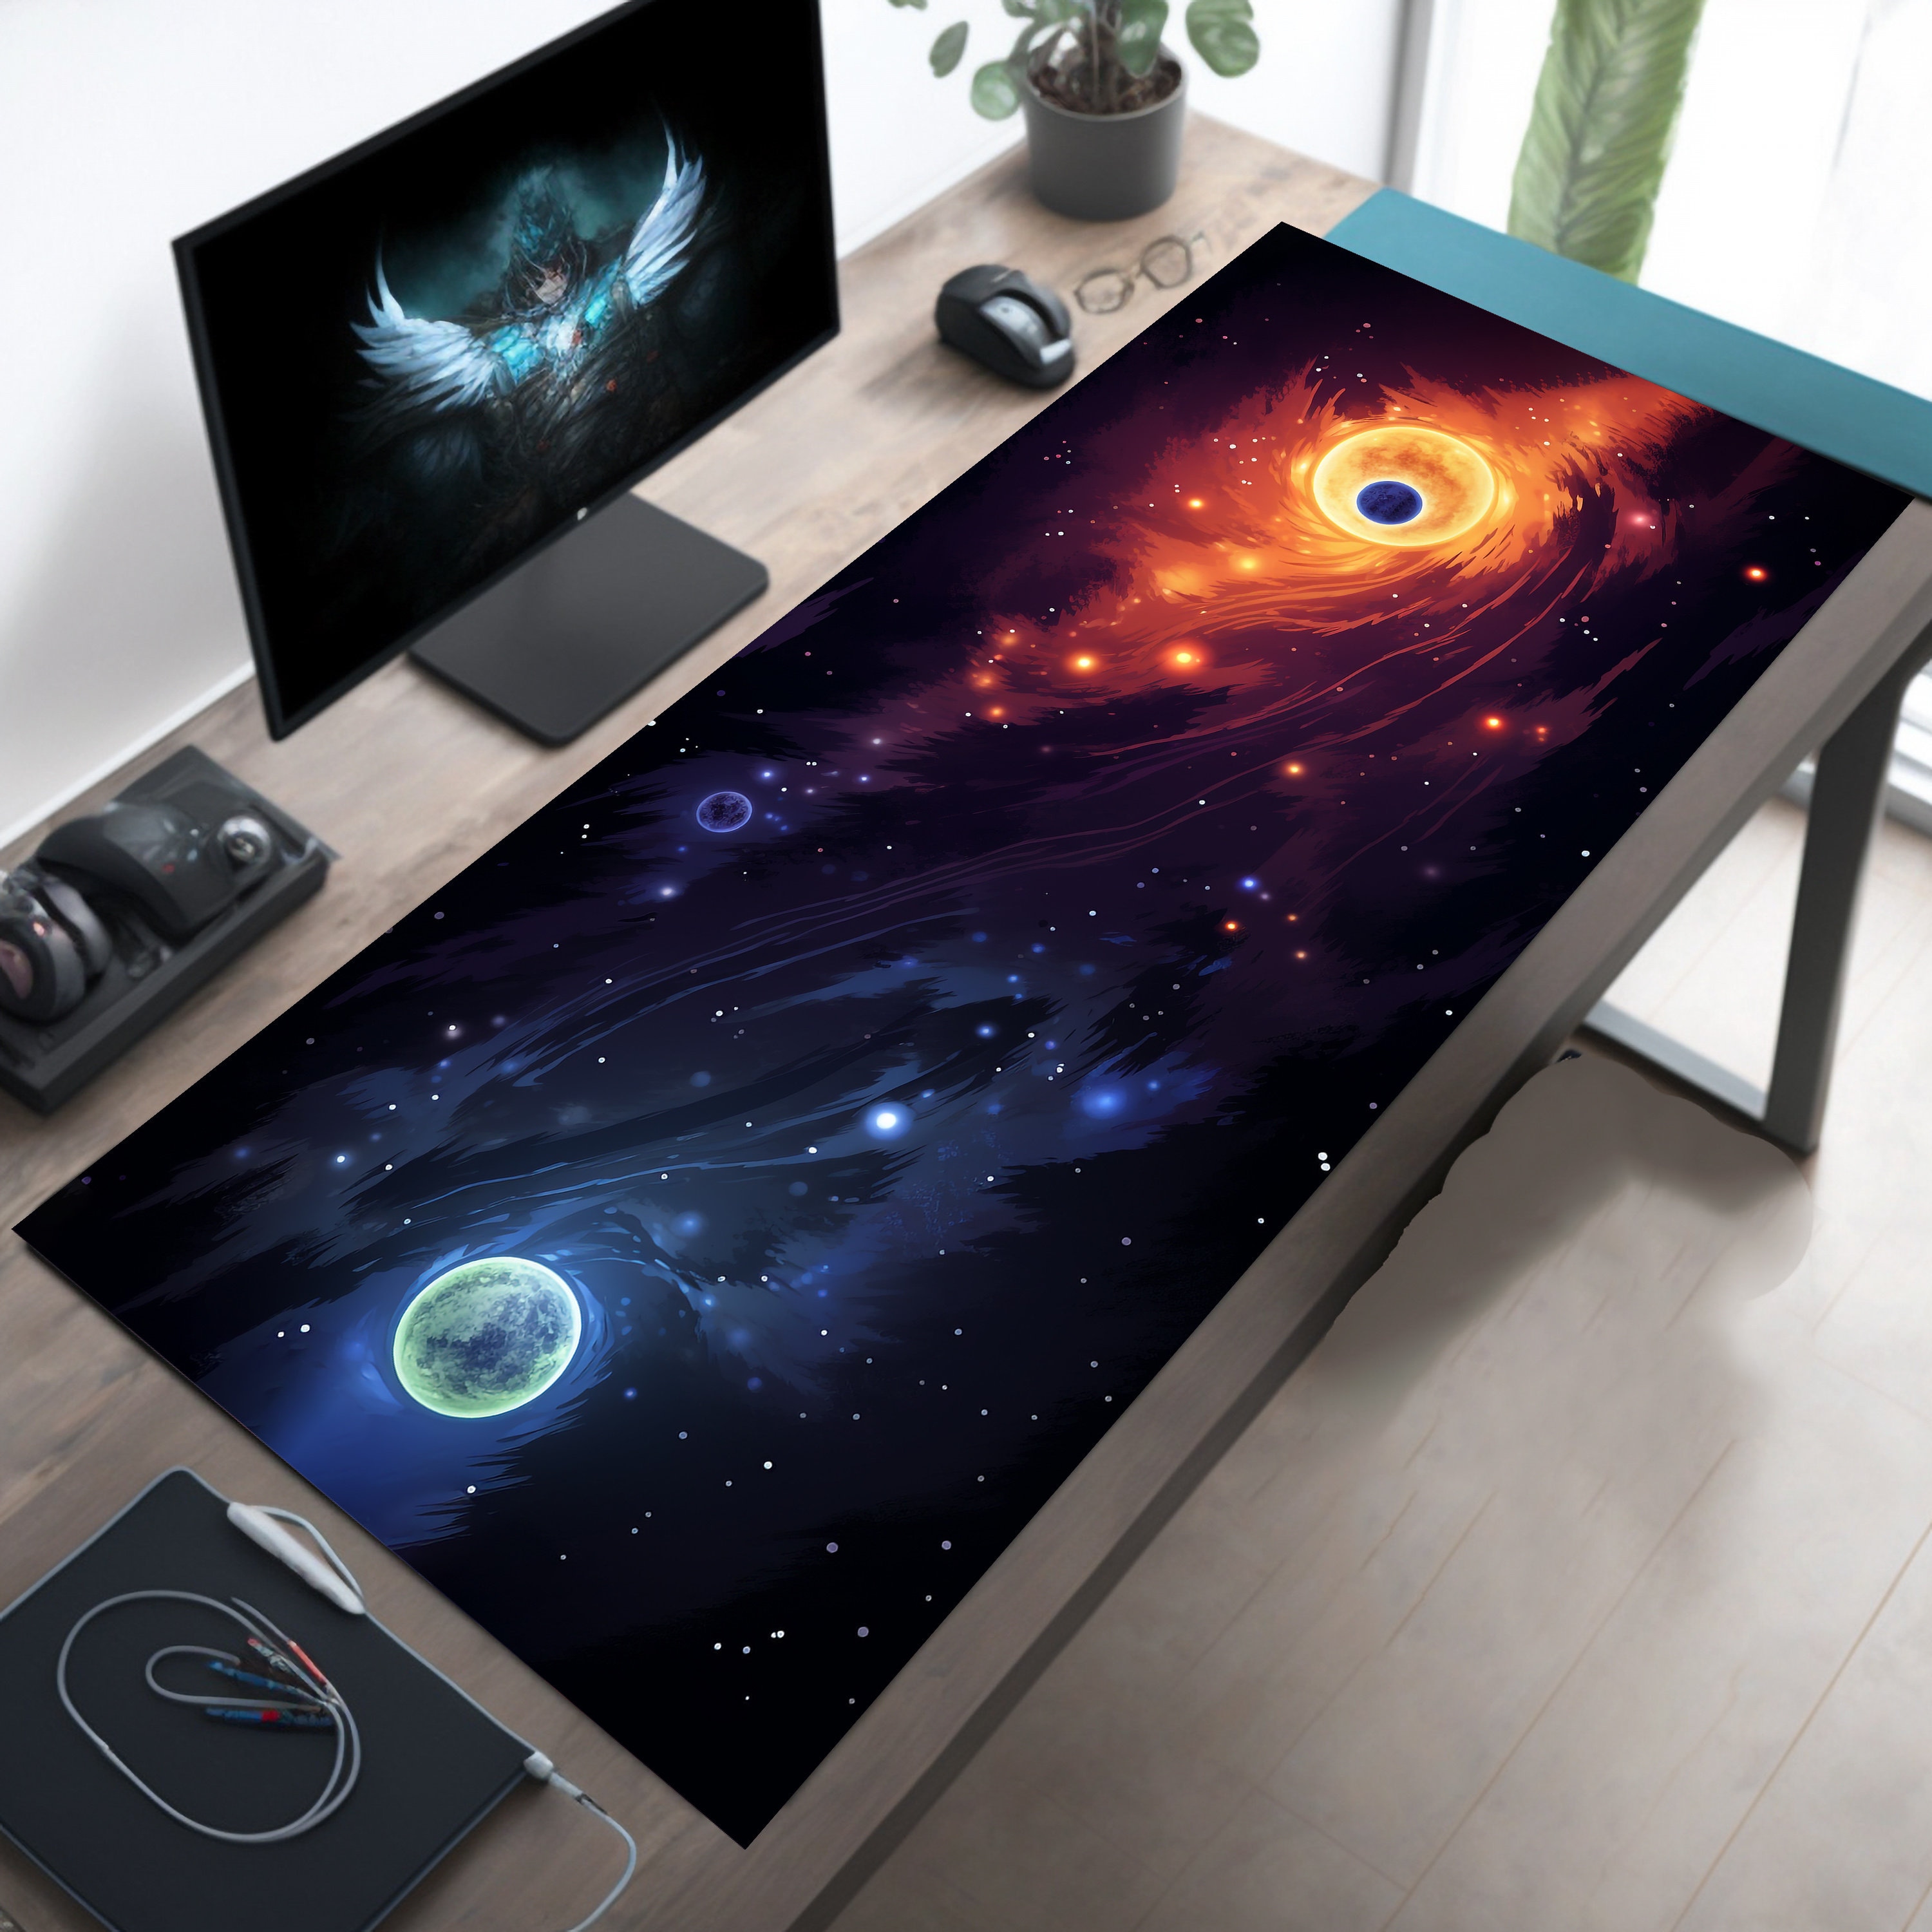 Discover Deep Space Desk Mat, Cosmic Desk Mat, Cosmos LED RGB Mouse Pads